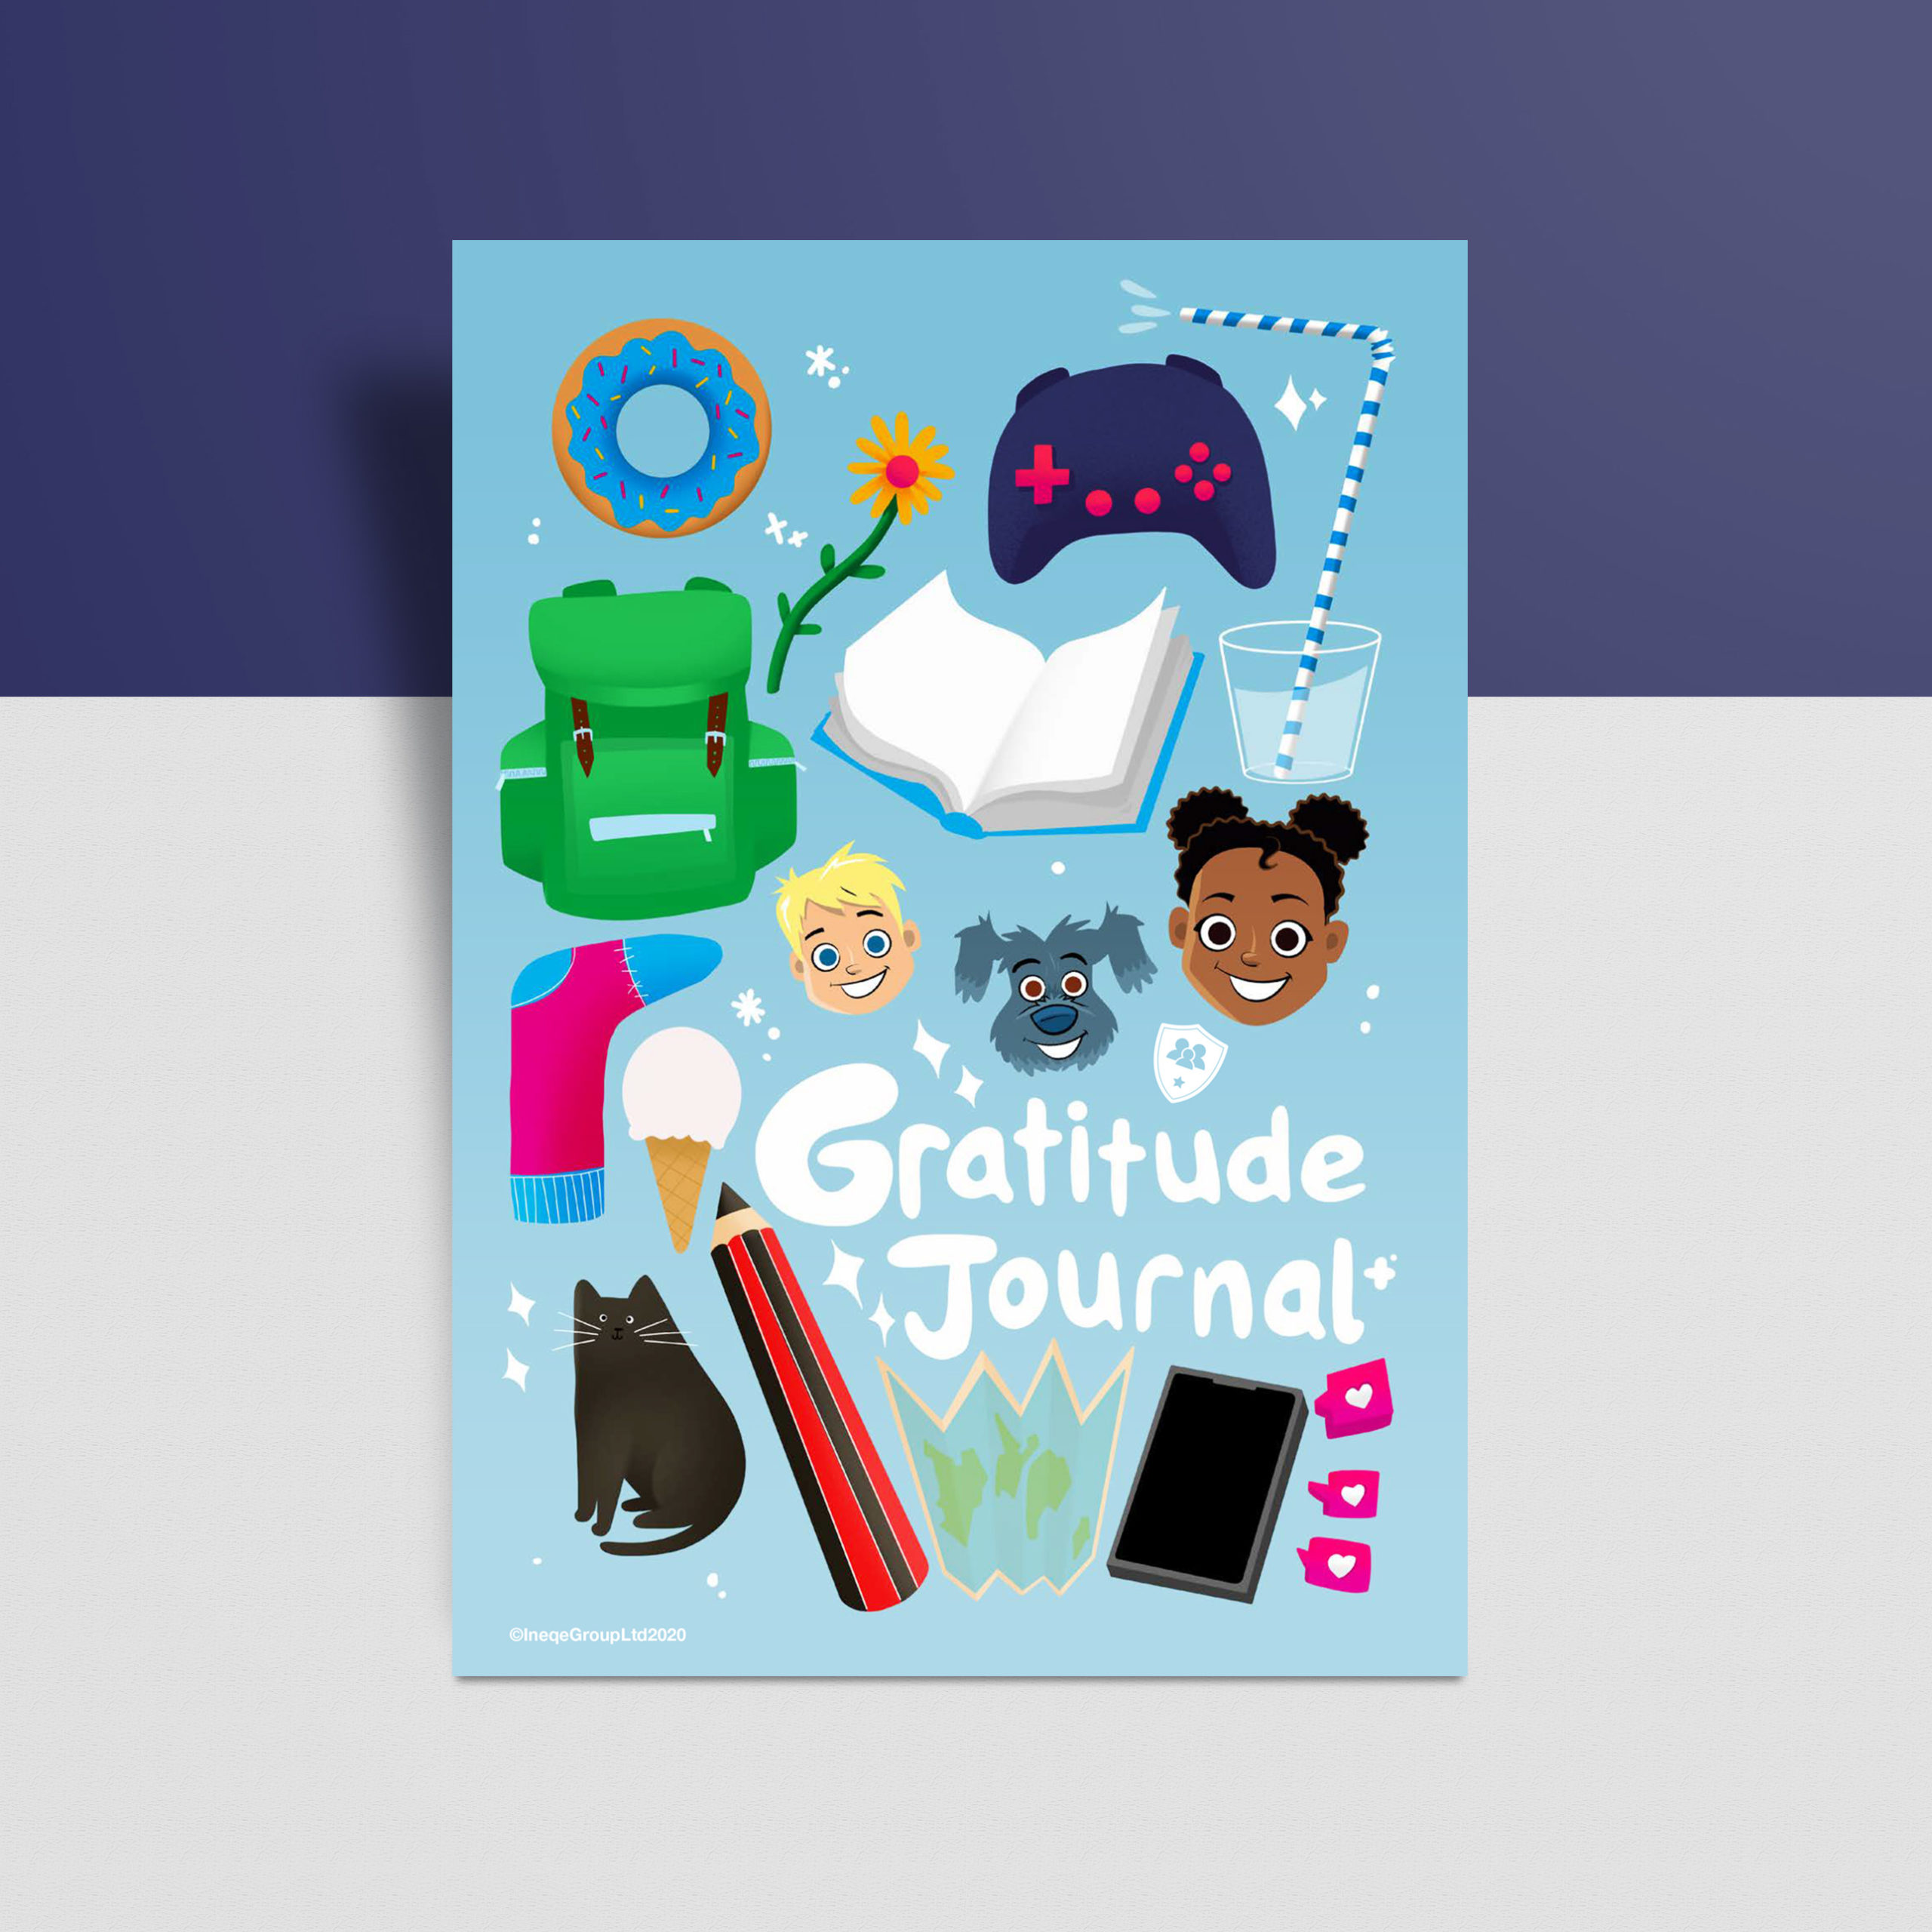 image of the gratitude journal